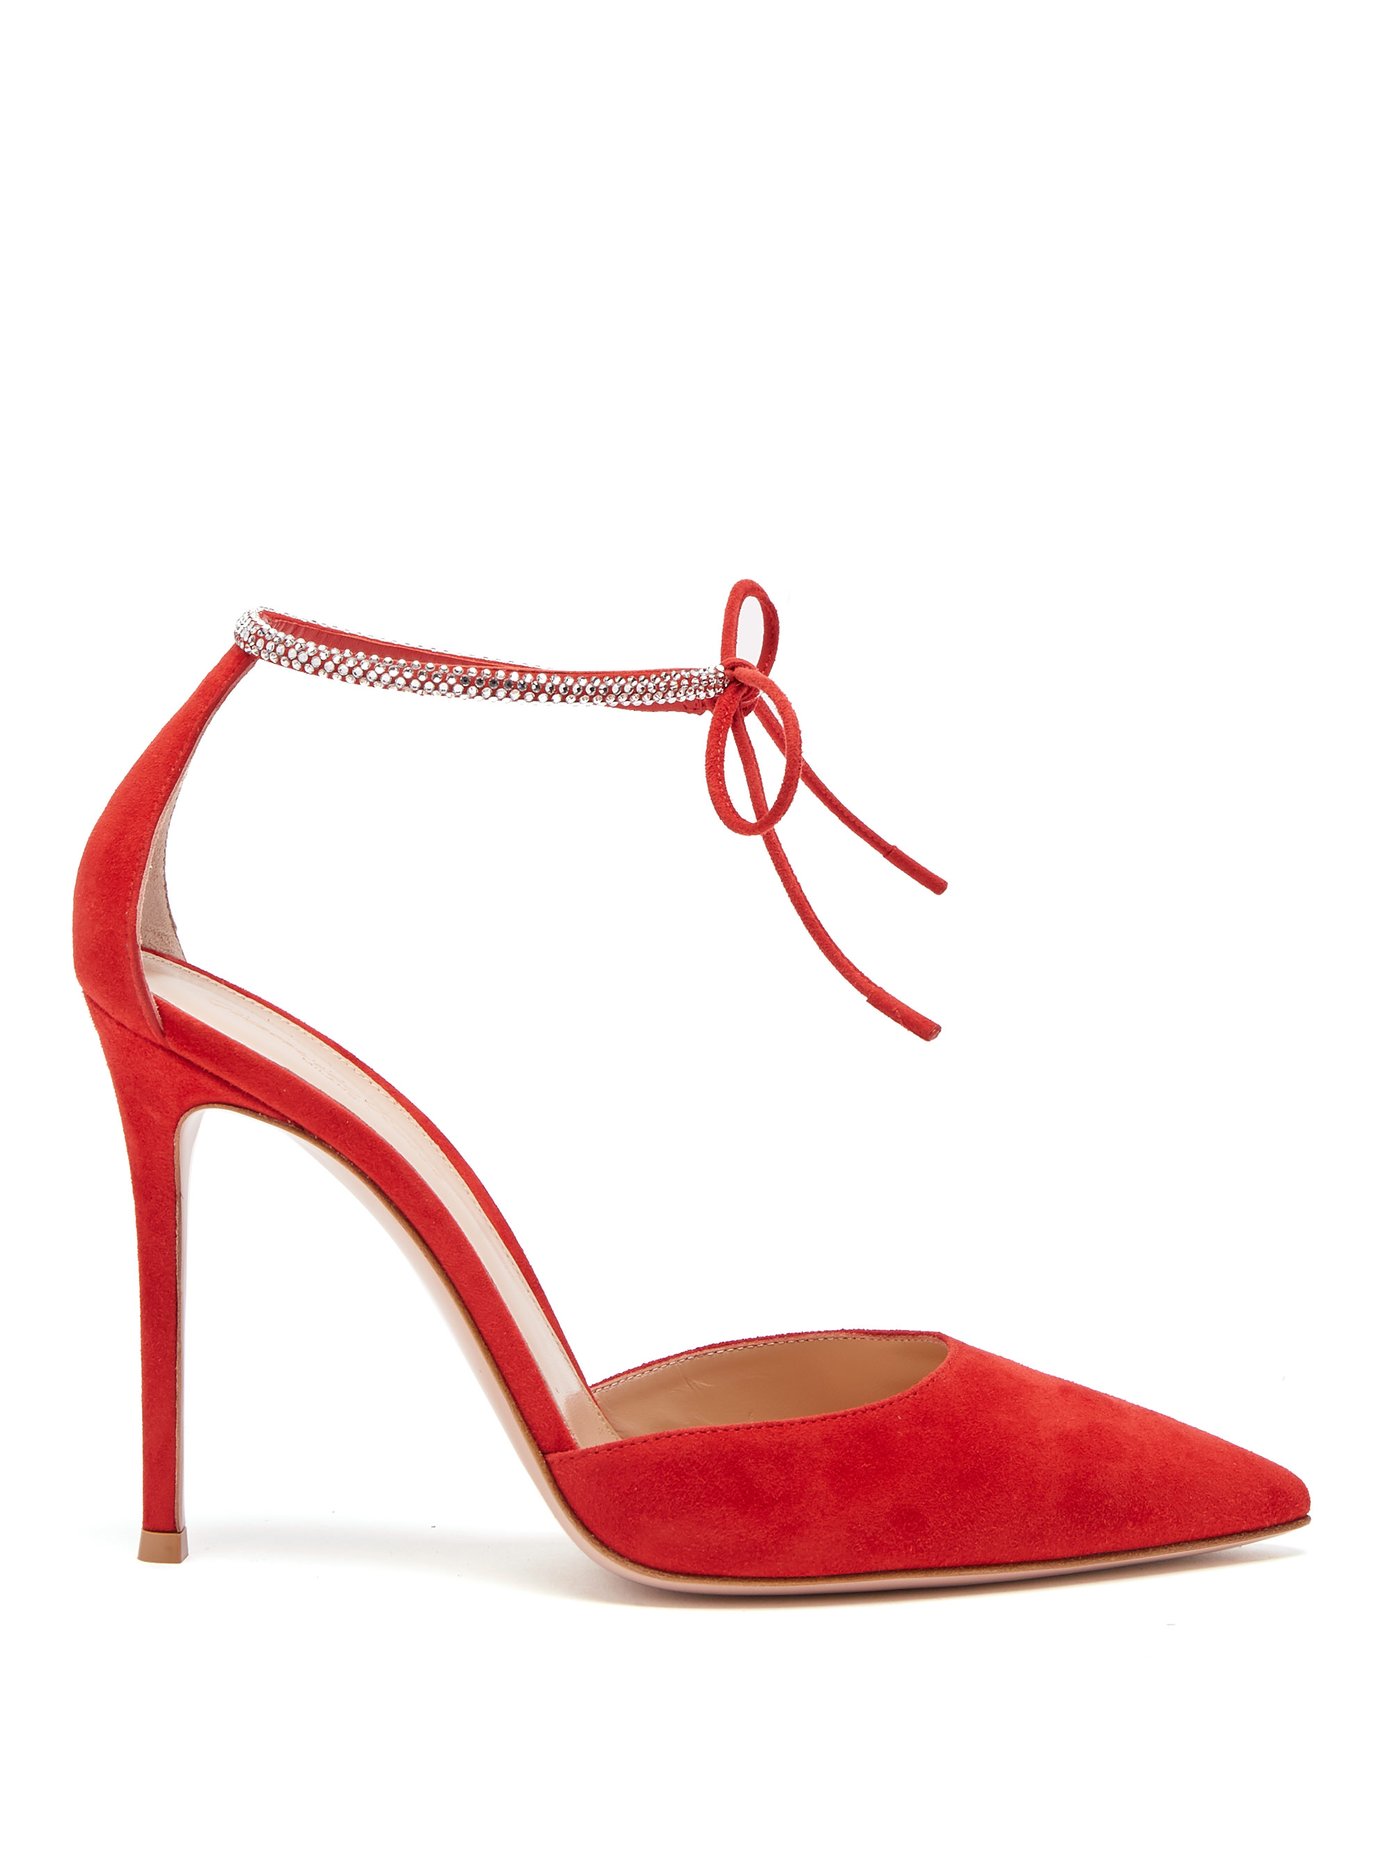 gianvito rossi red suede pumps